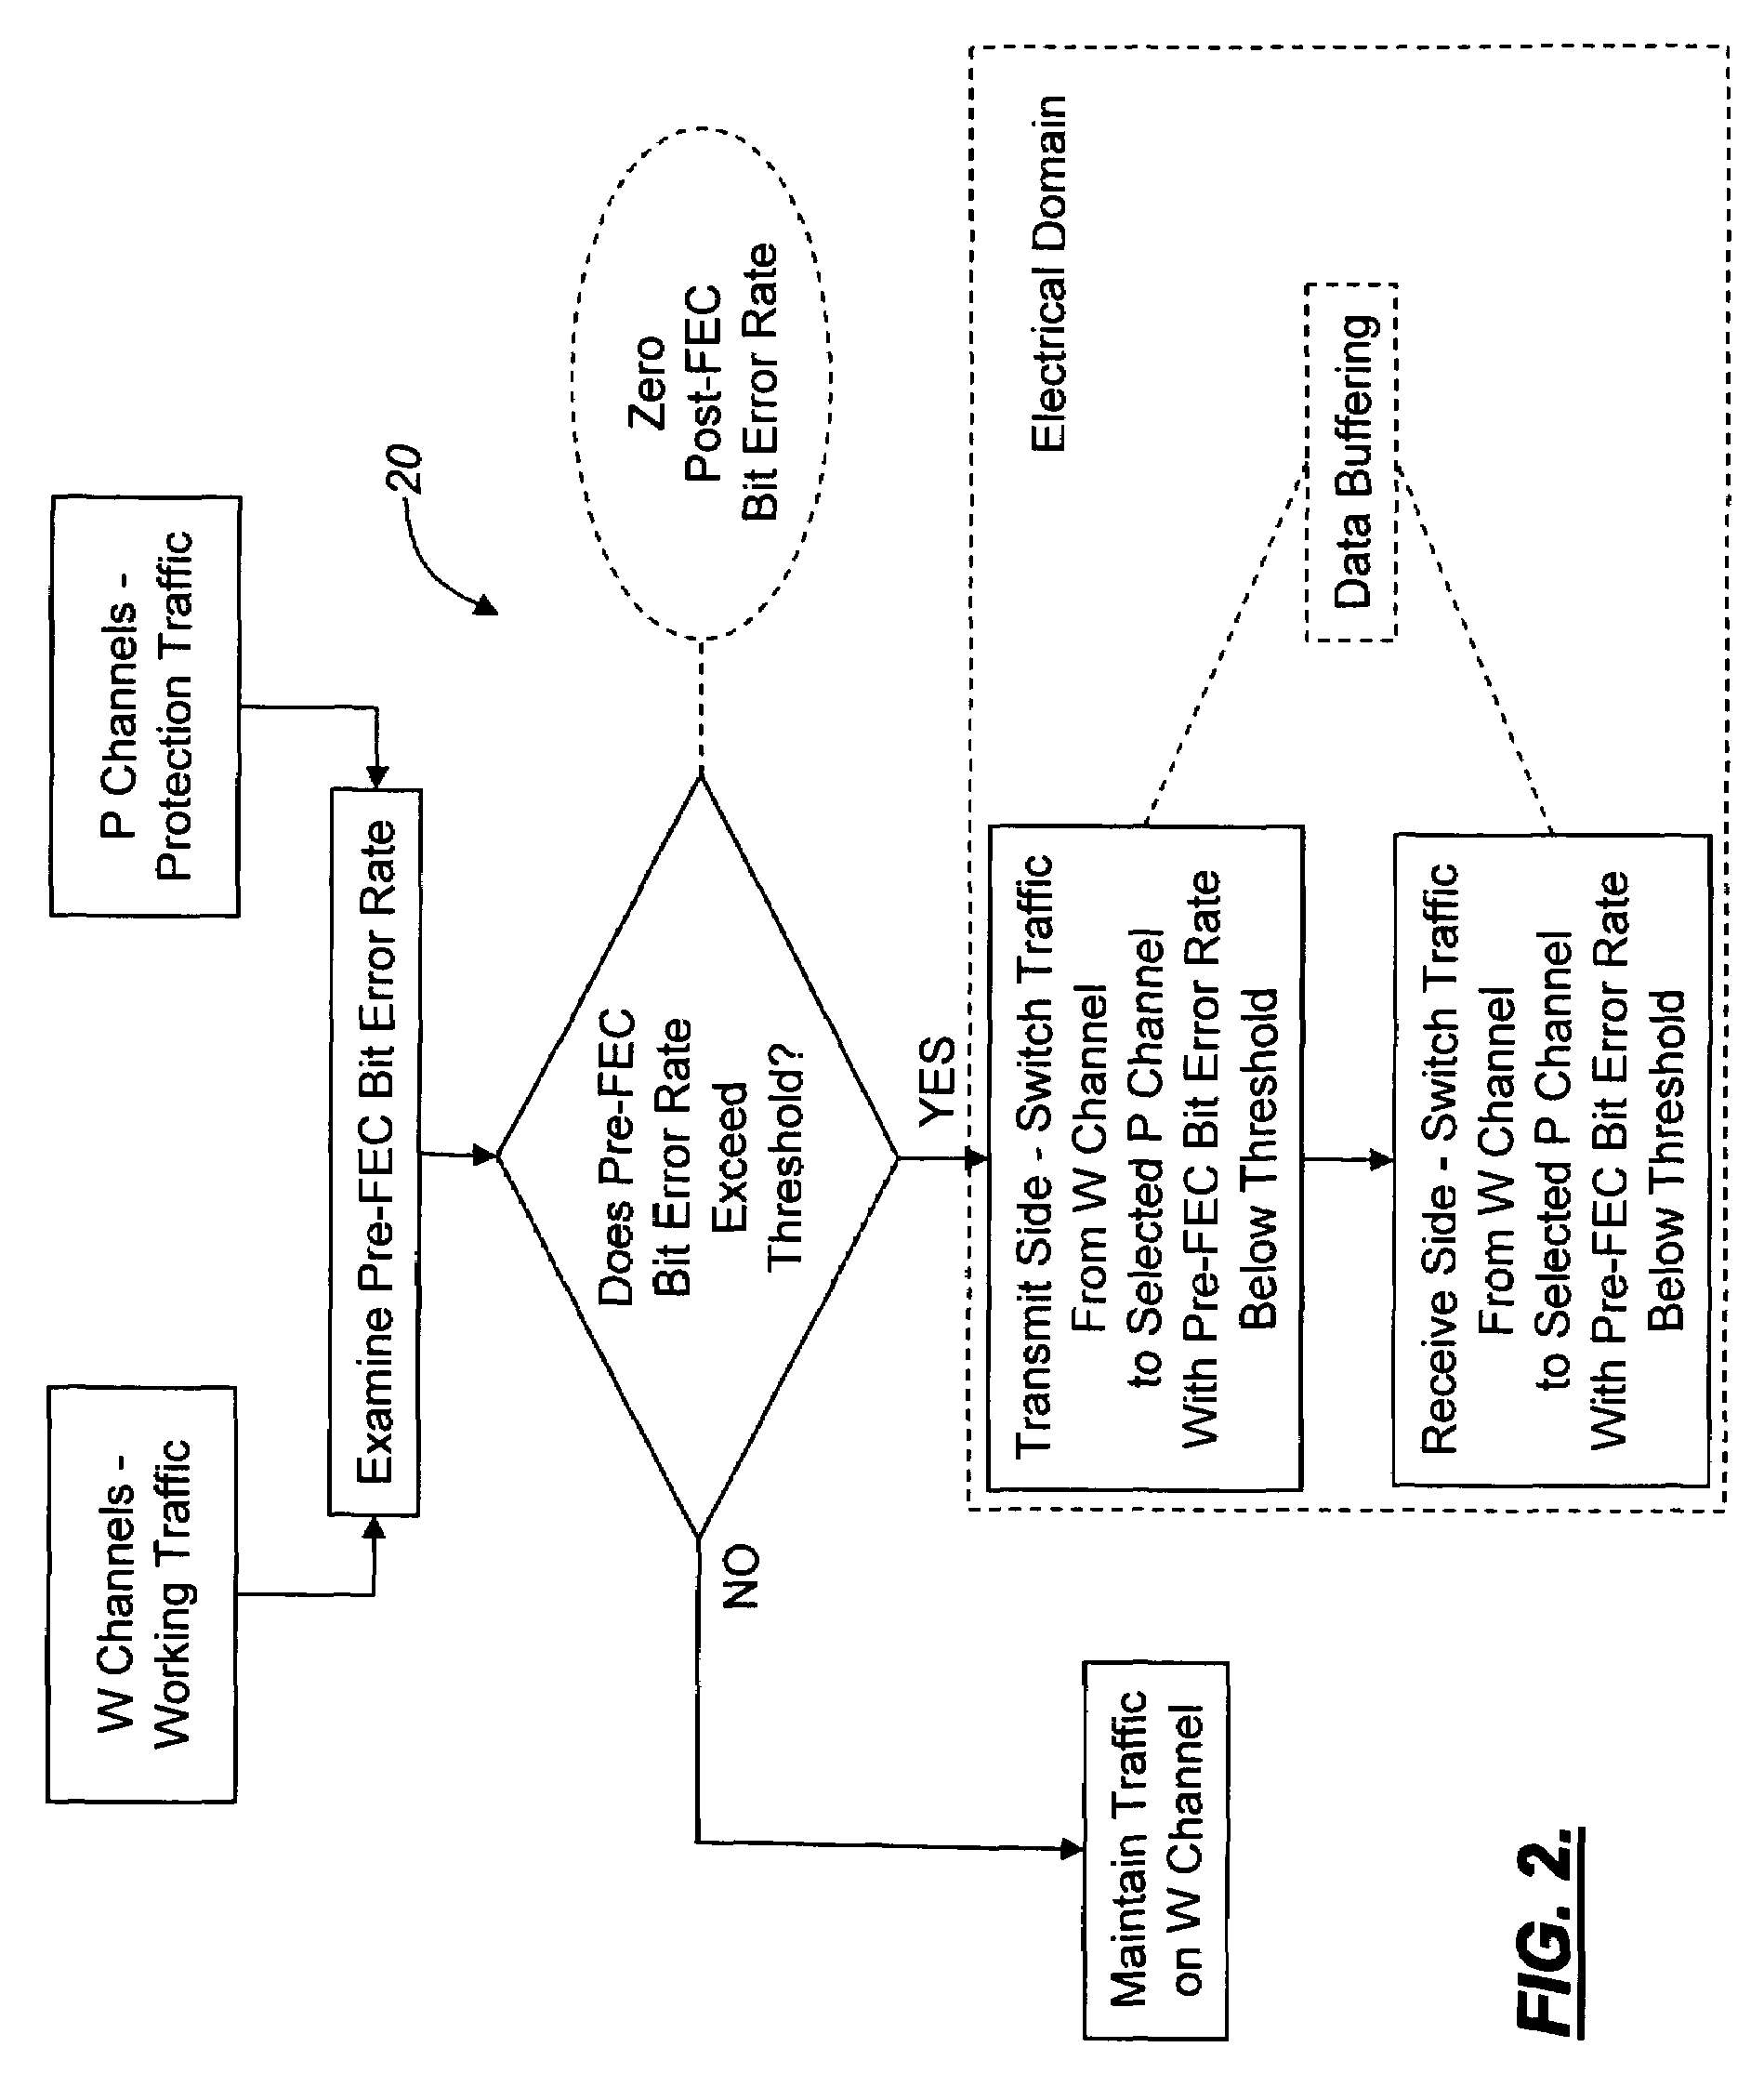 Multi-channel protection switching systems and methods for increased reliability and reduced cost